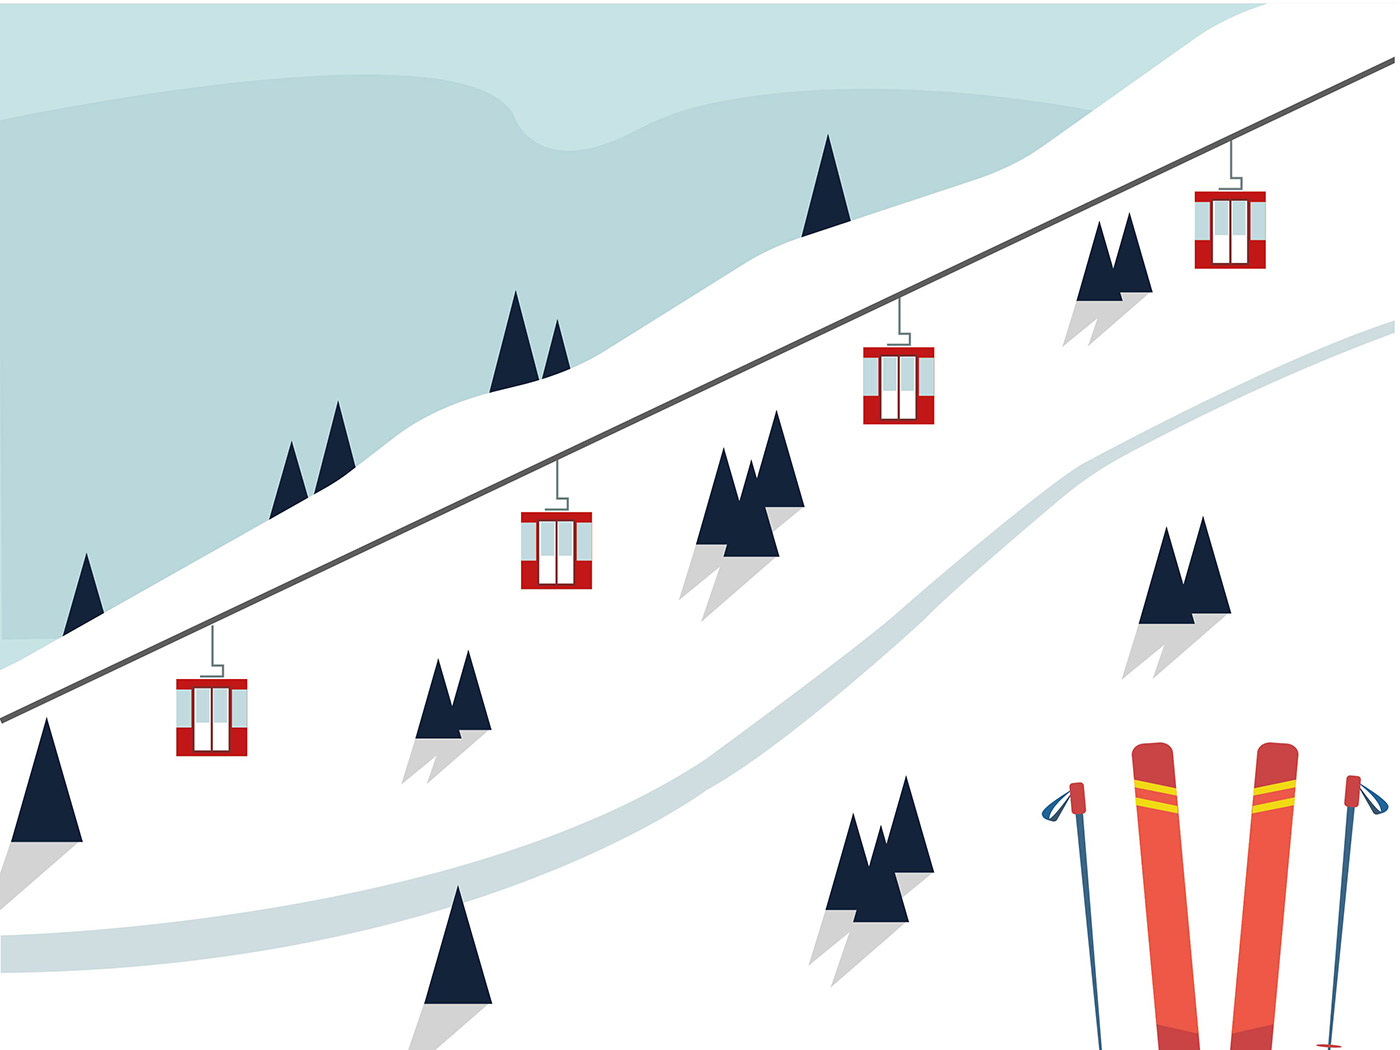 Mountain skiing routes and skis, winter landscape illustration